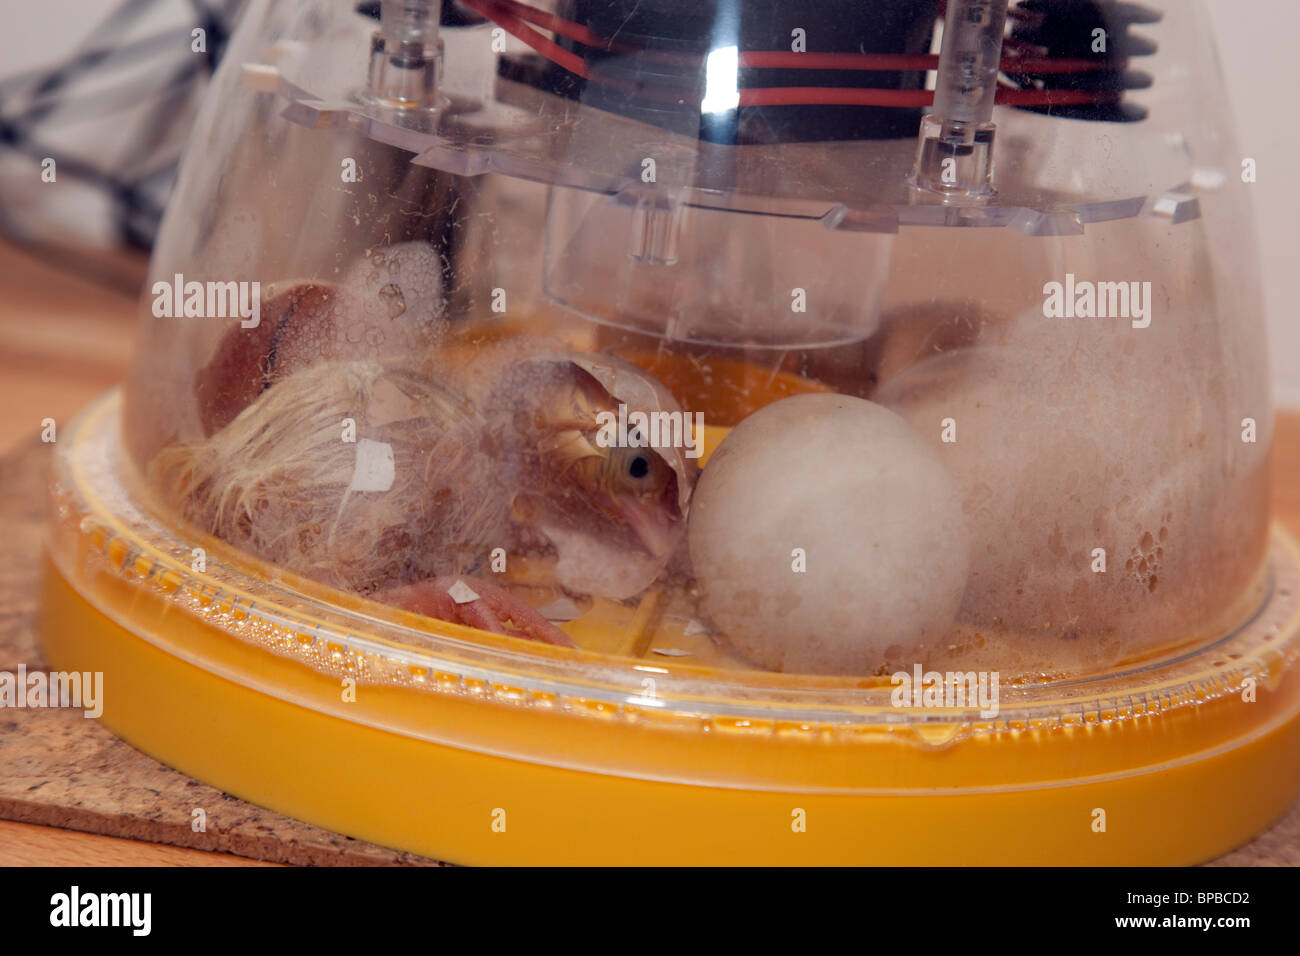 Chick hatching in an incubator - belongs to photogrpaher Stock Photo